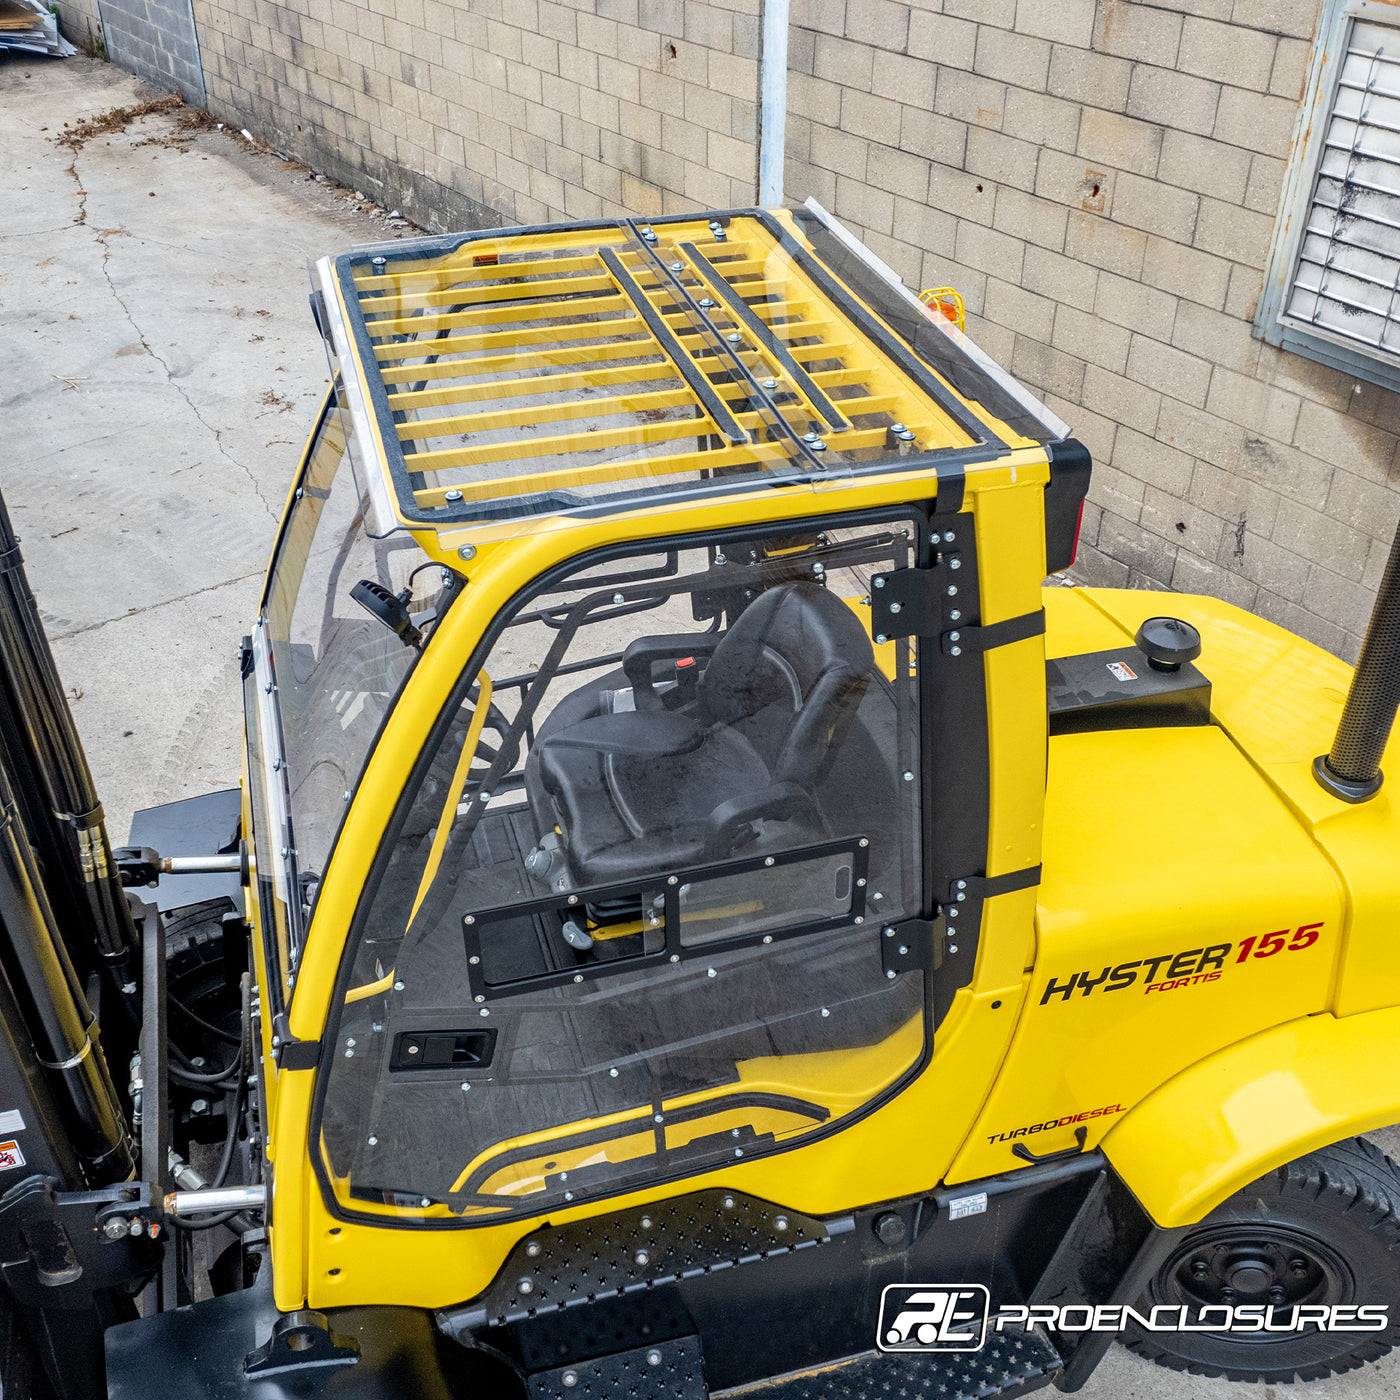 Hyster-Yale Forklift Roof